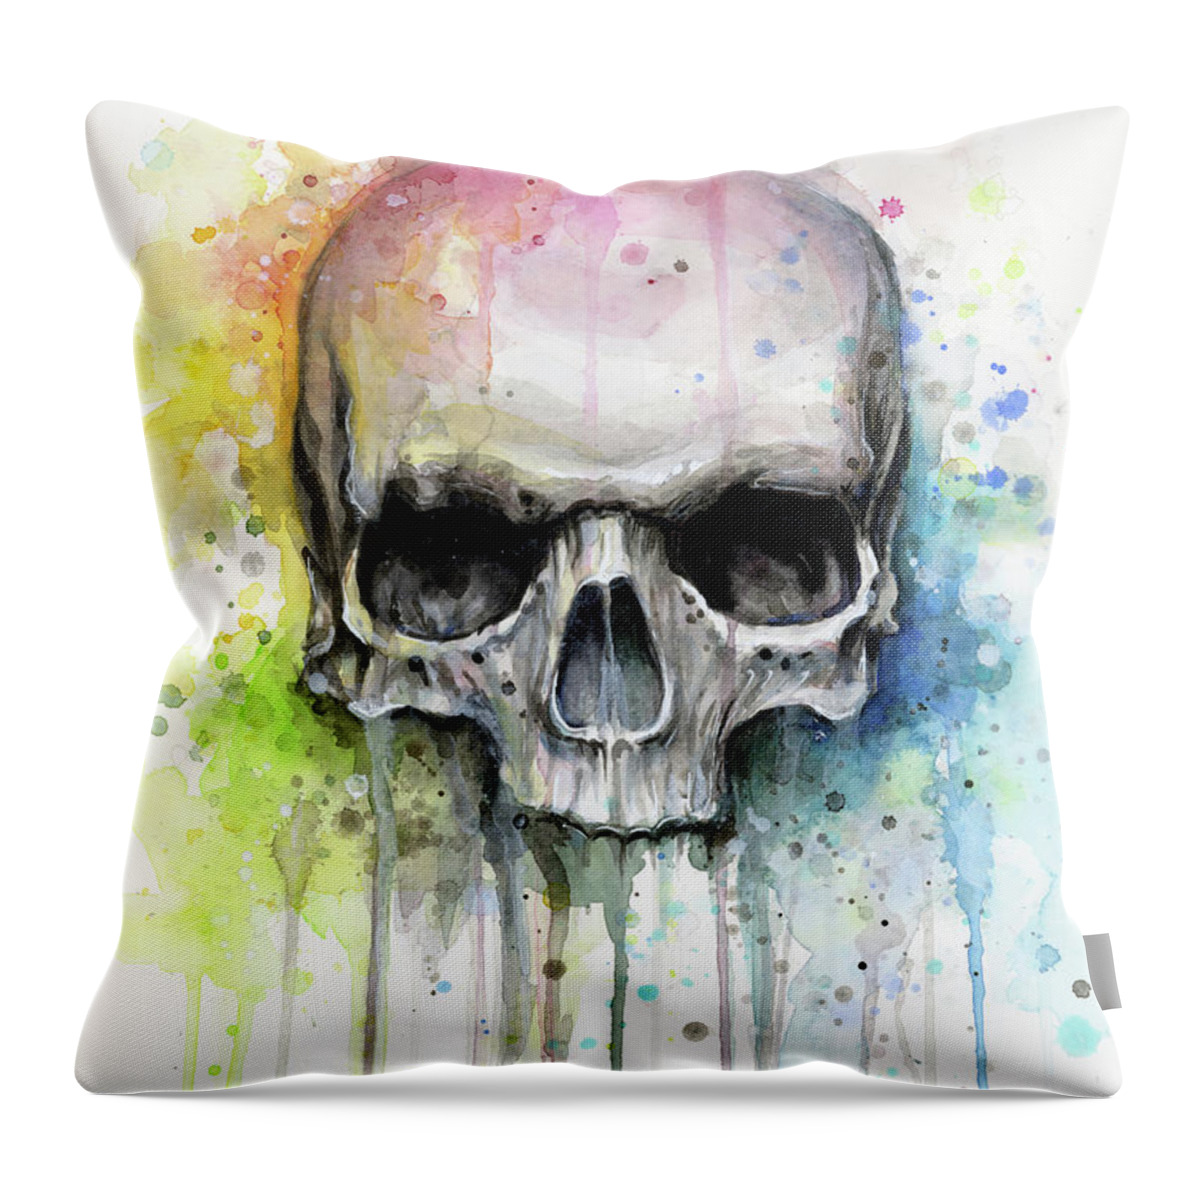 Skull Throw Pillow featuring the painting Skull Watercolor Painting by Olga Shvartsur